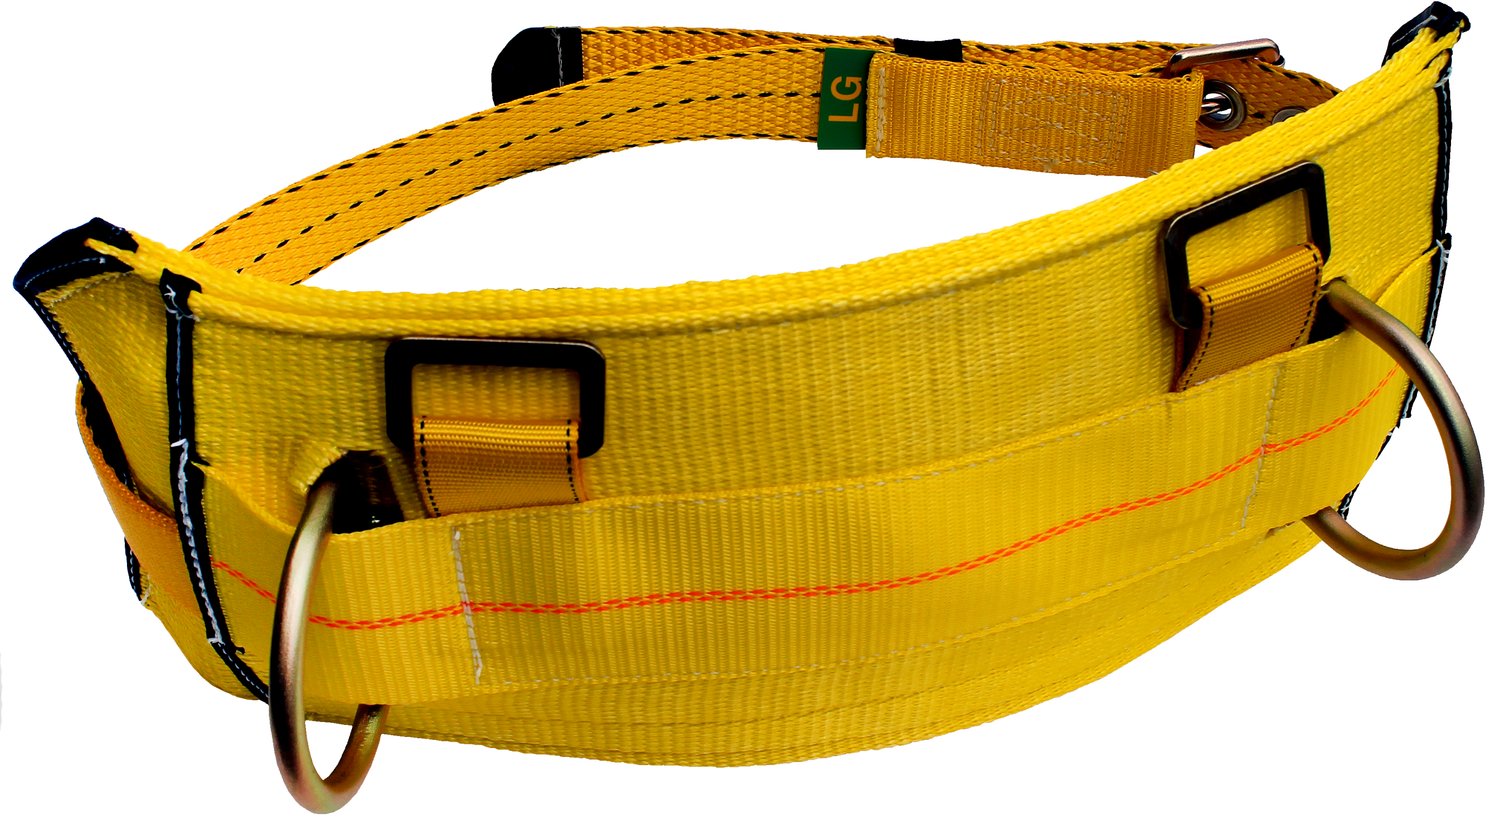 7012814984 - 3M DBI-SALA Derrick Tongue Buckle Positioning Belt with Pass-Thru Harness Connector 1000544, Yellow, Large